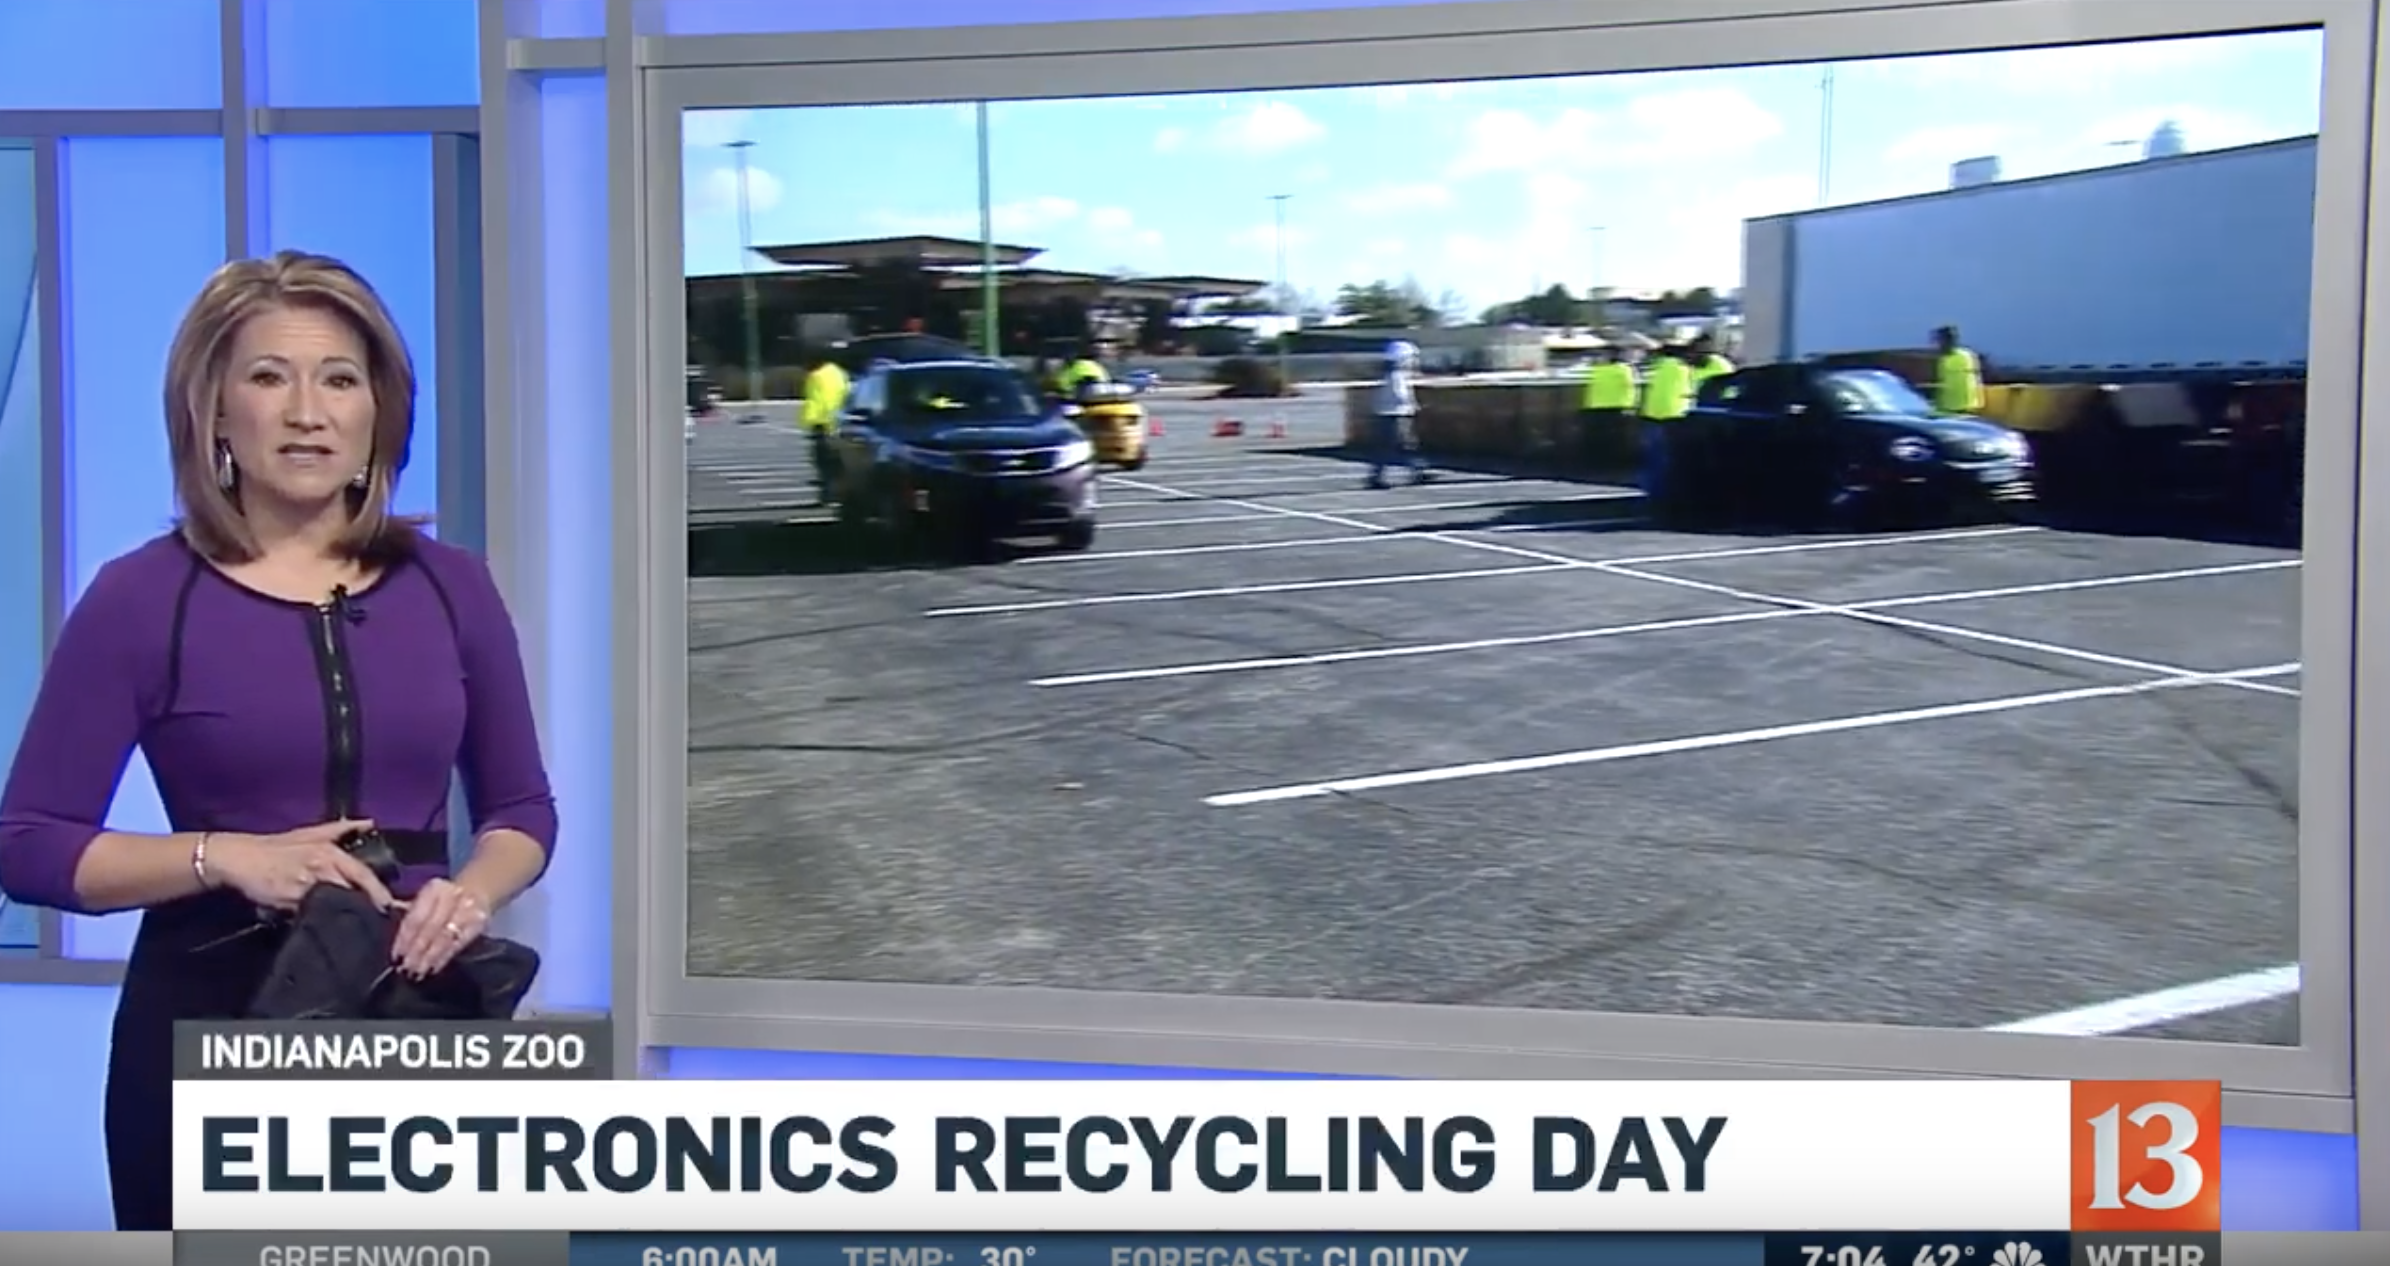 Indianapolis Zoo Recycling Event Featured on WTHR 13